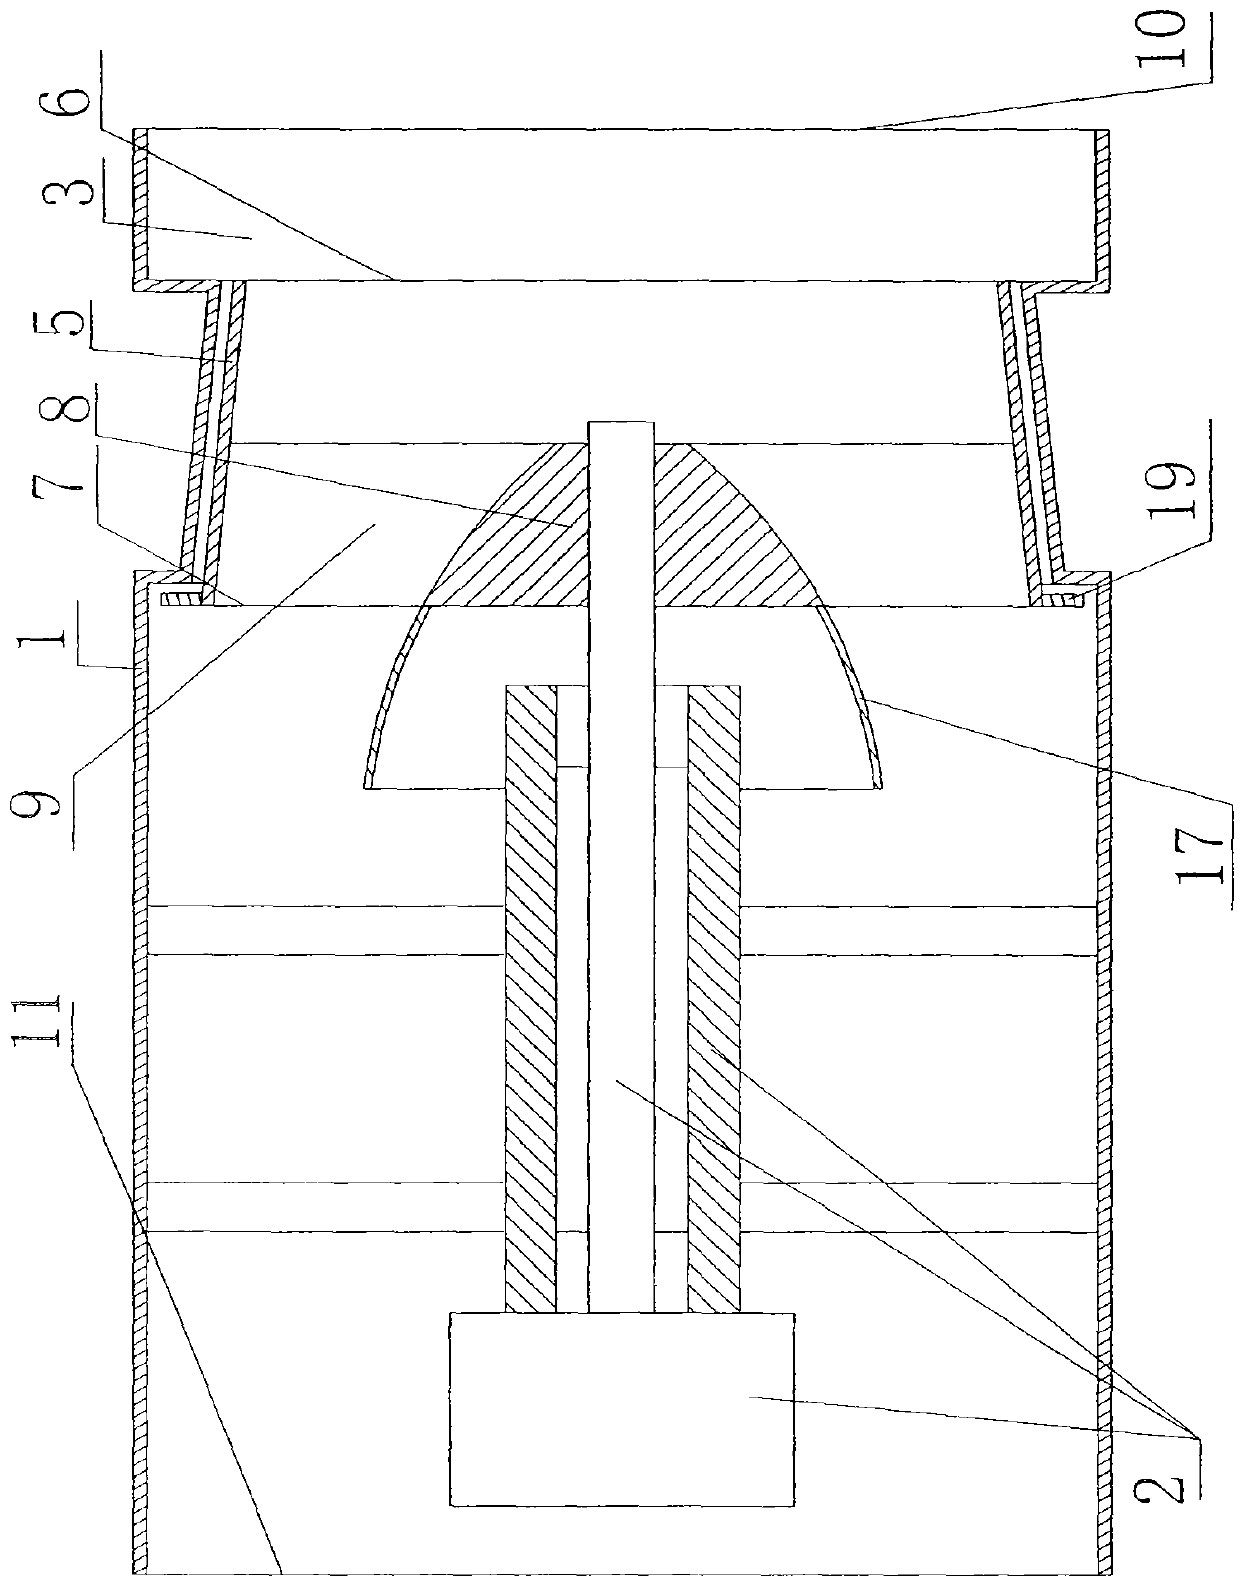 Axial flow device